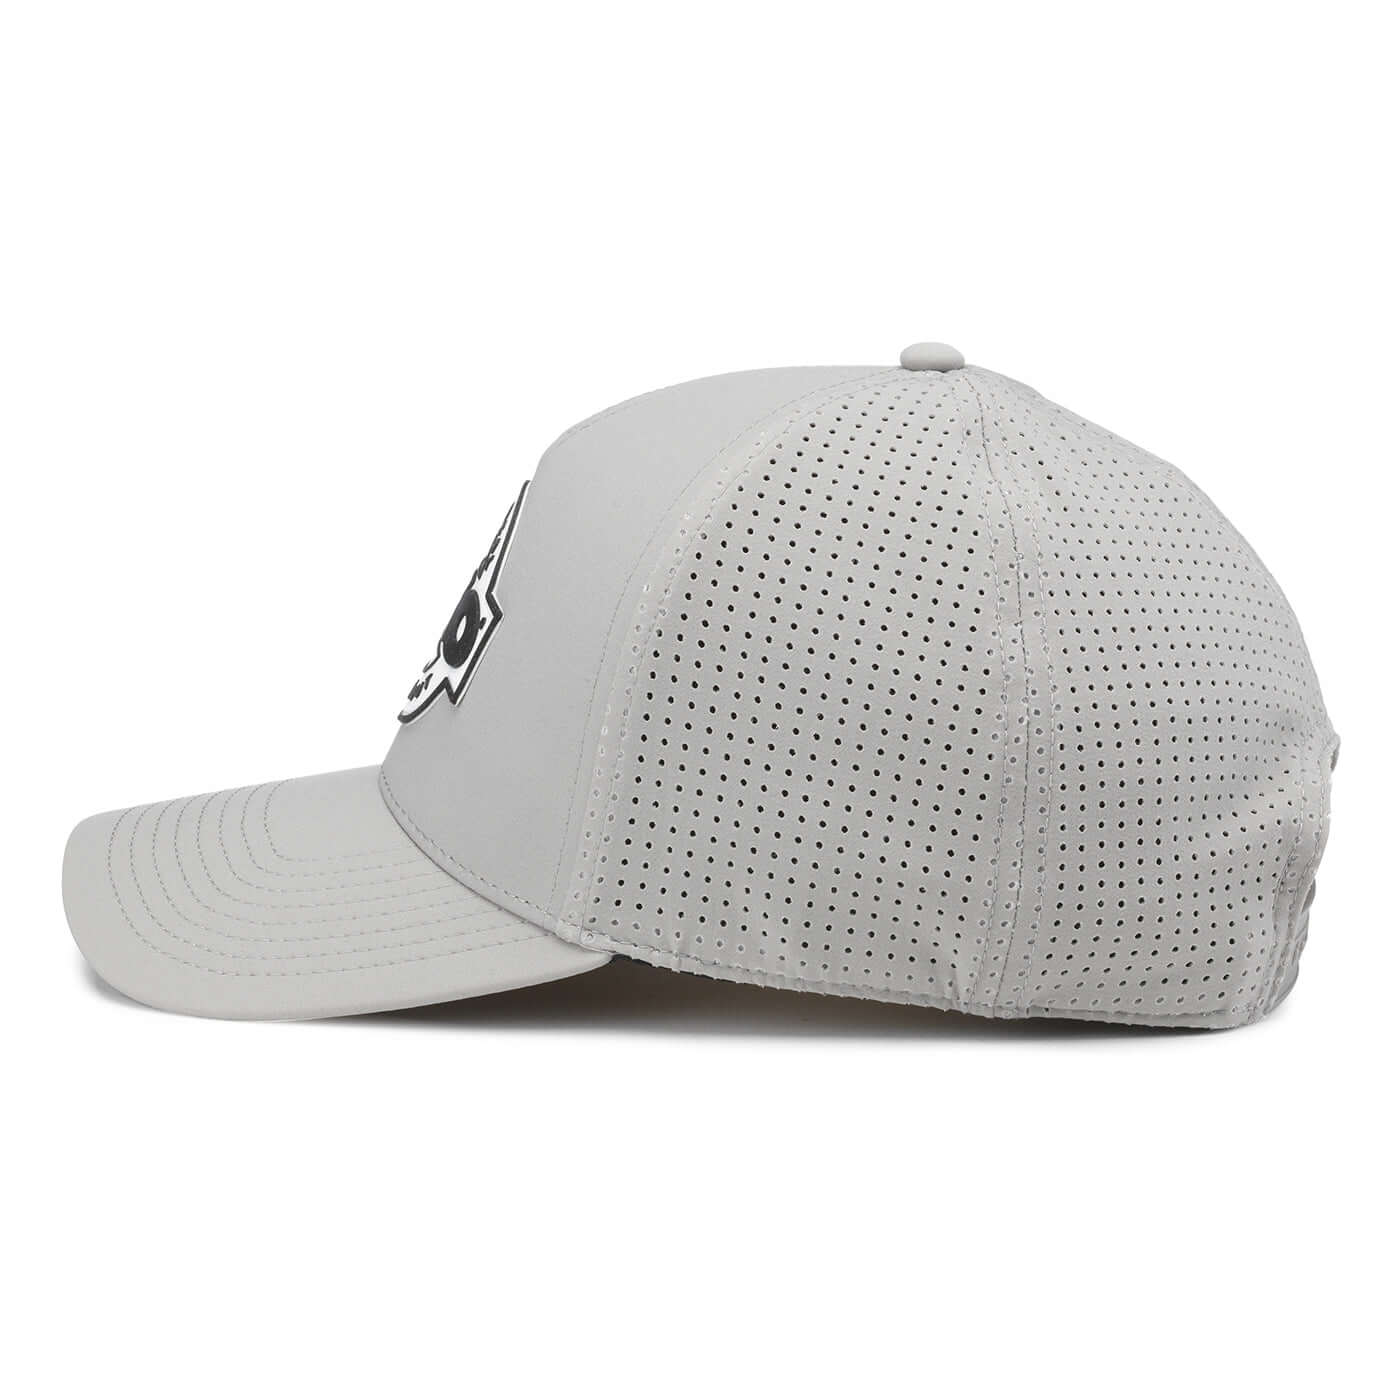 TKO Strength & Performance Hats: Pewter/White Cooling Mesh PVC Patch Hat | Workout